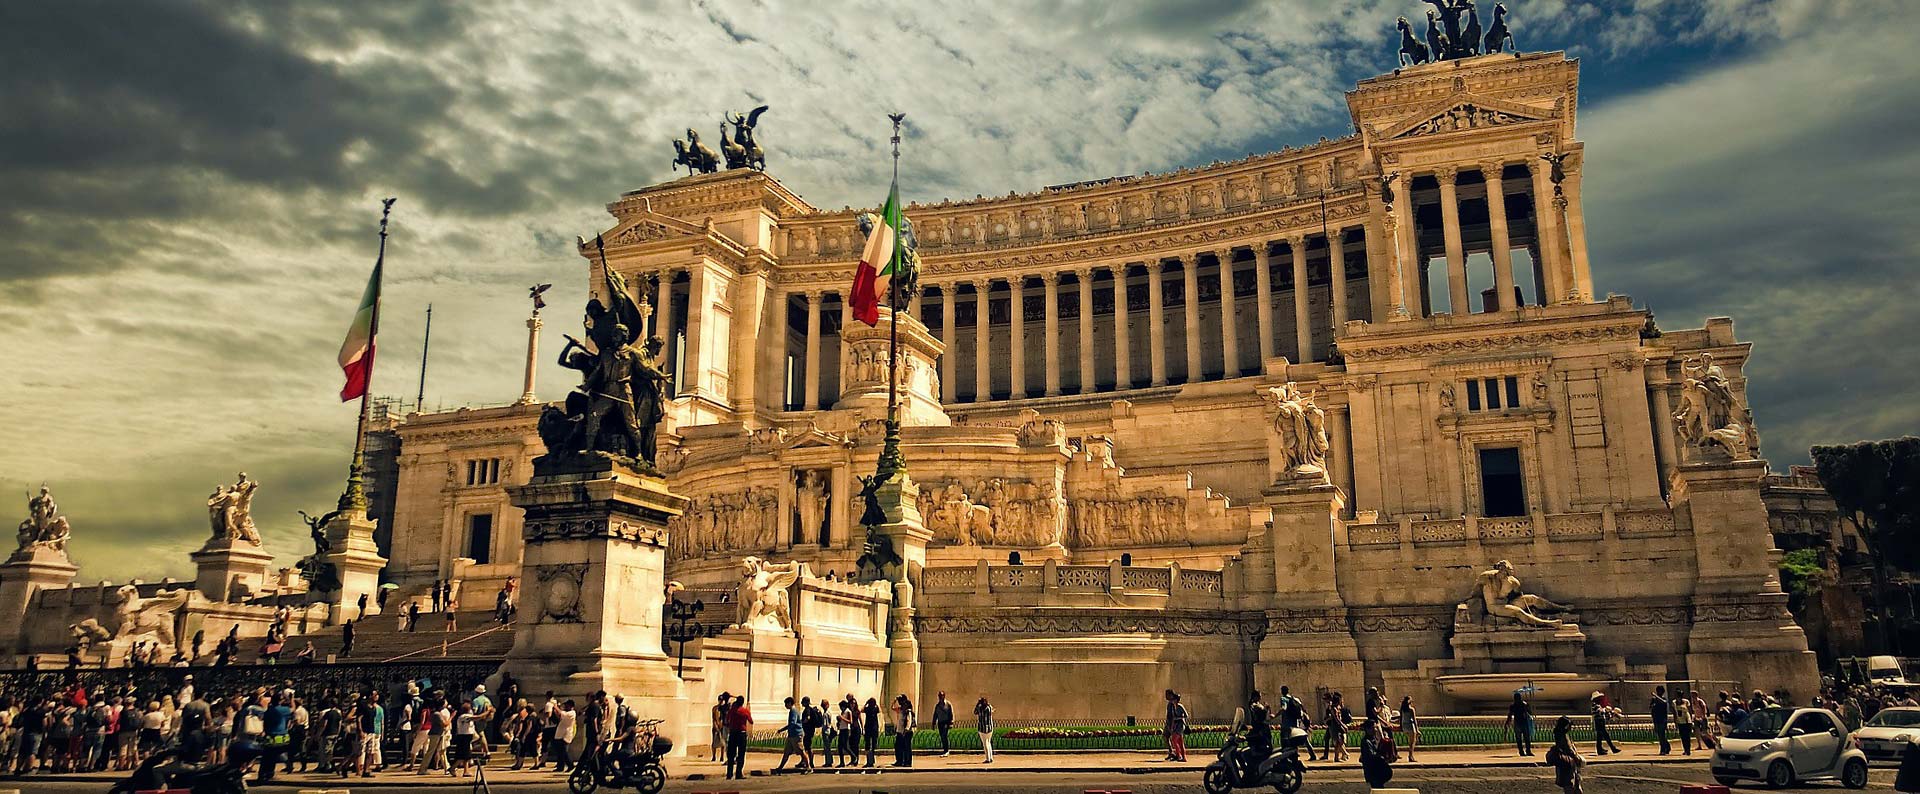 Discounted flight tickets from Chicago to Rome - IFlyFirstClass